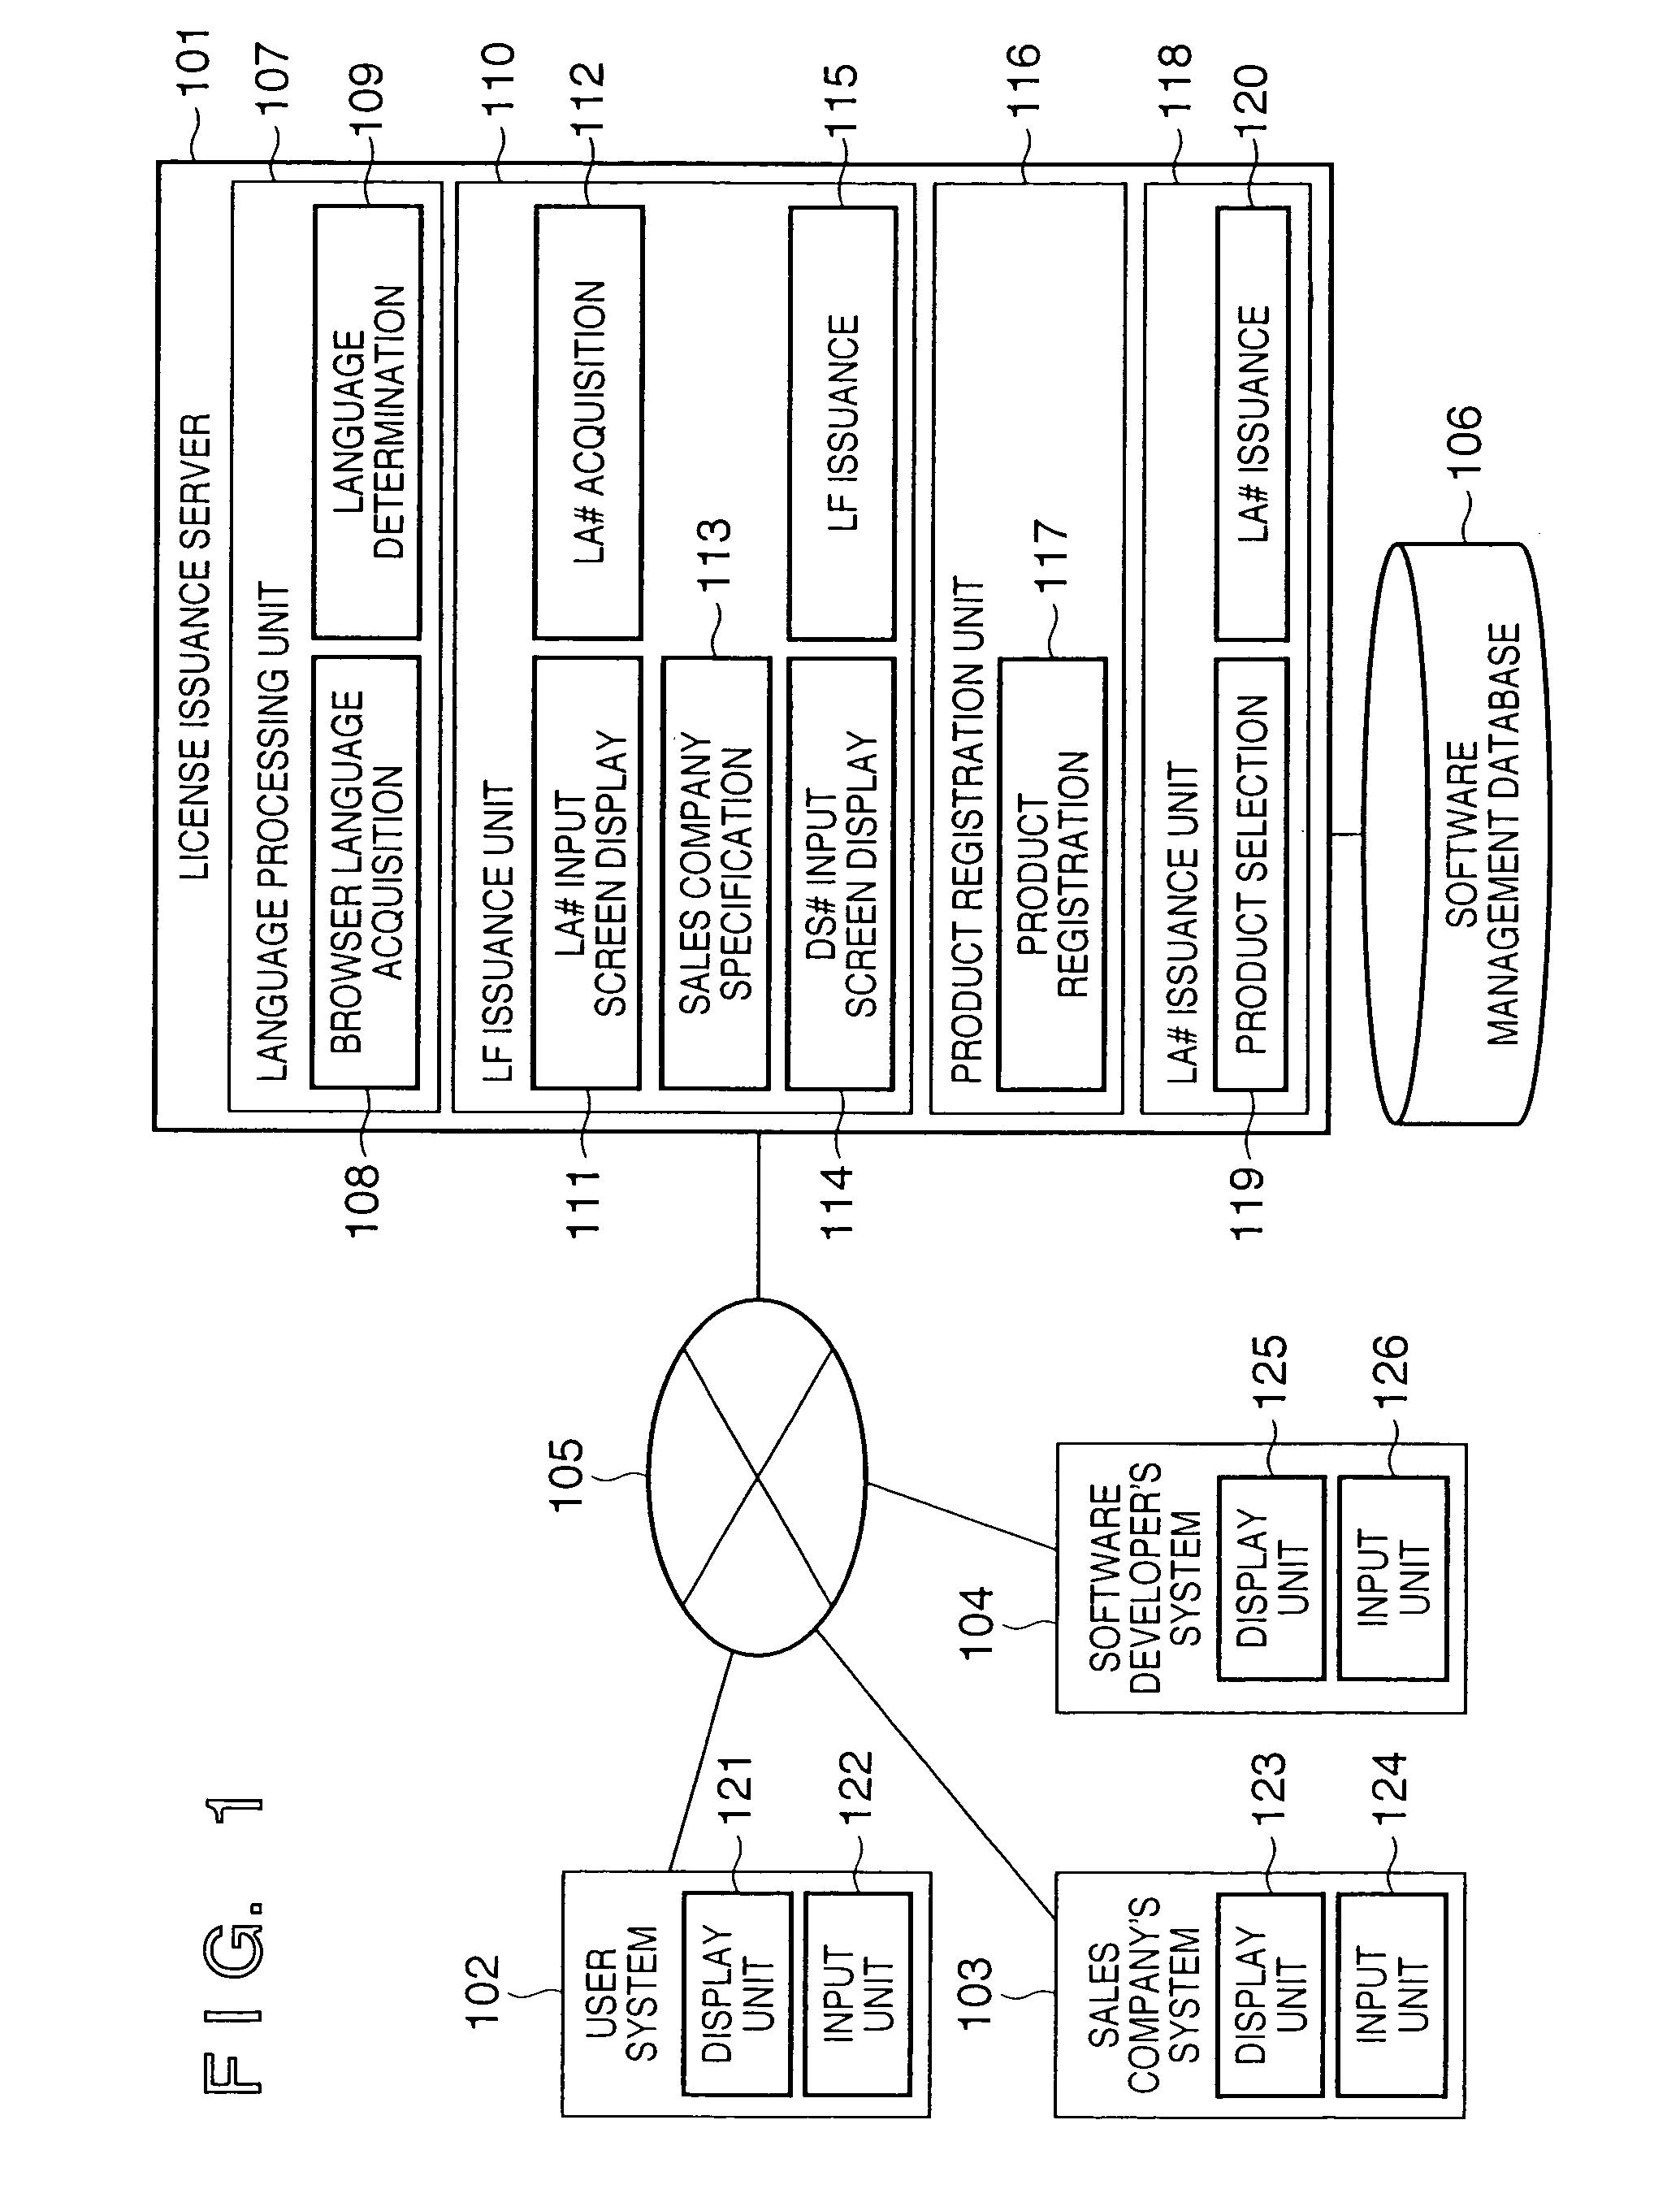 Management apparatus, method and program for managing use of software